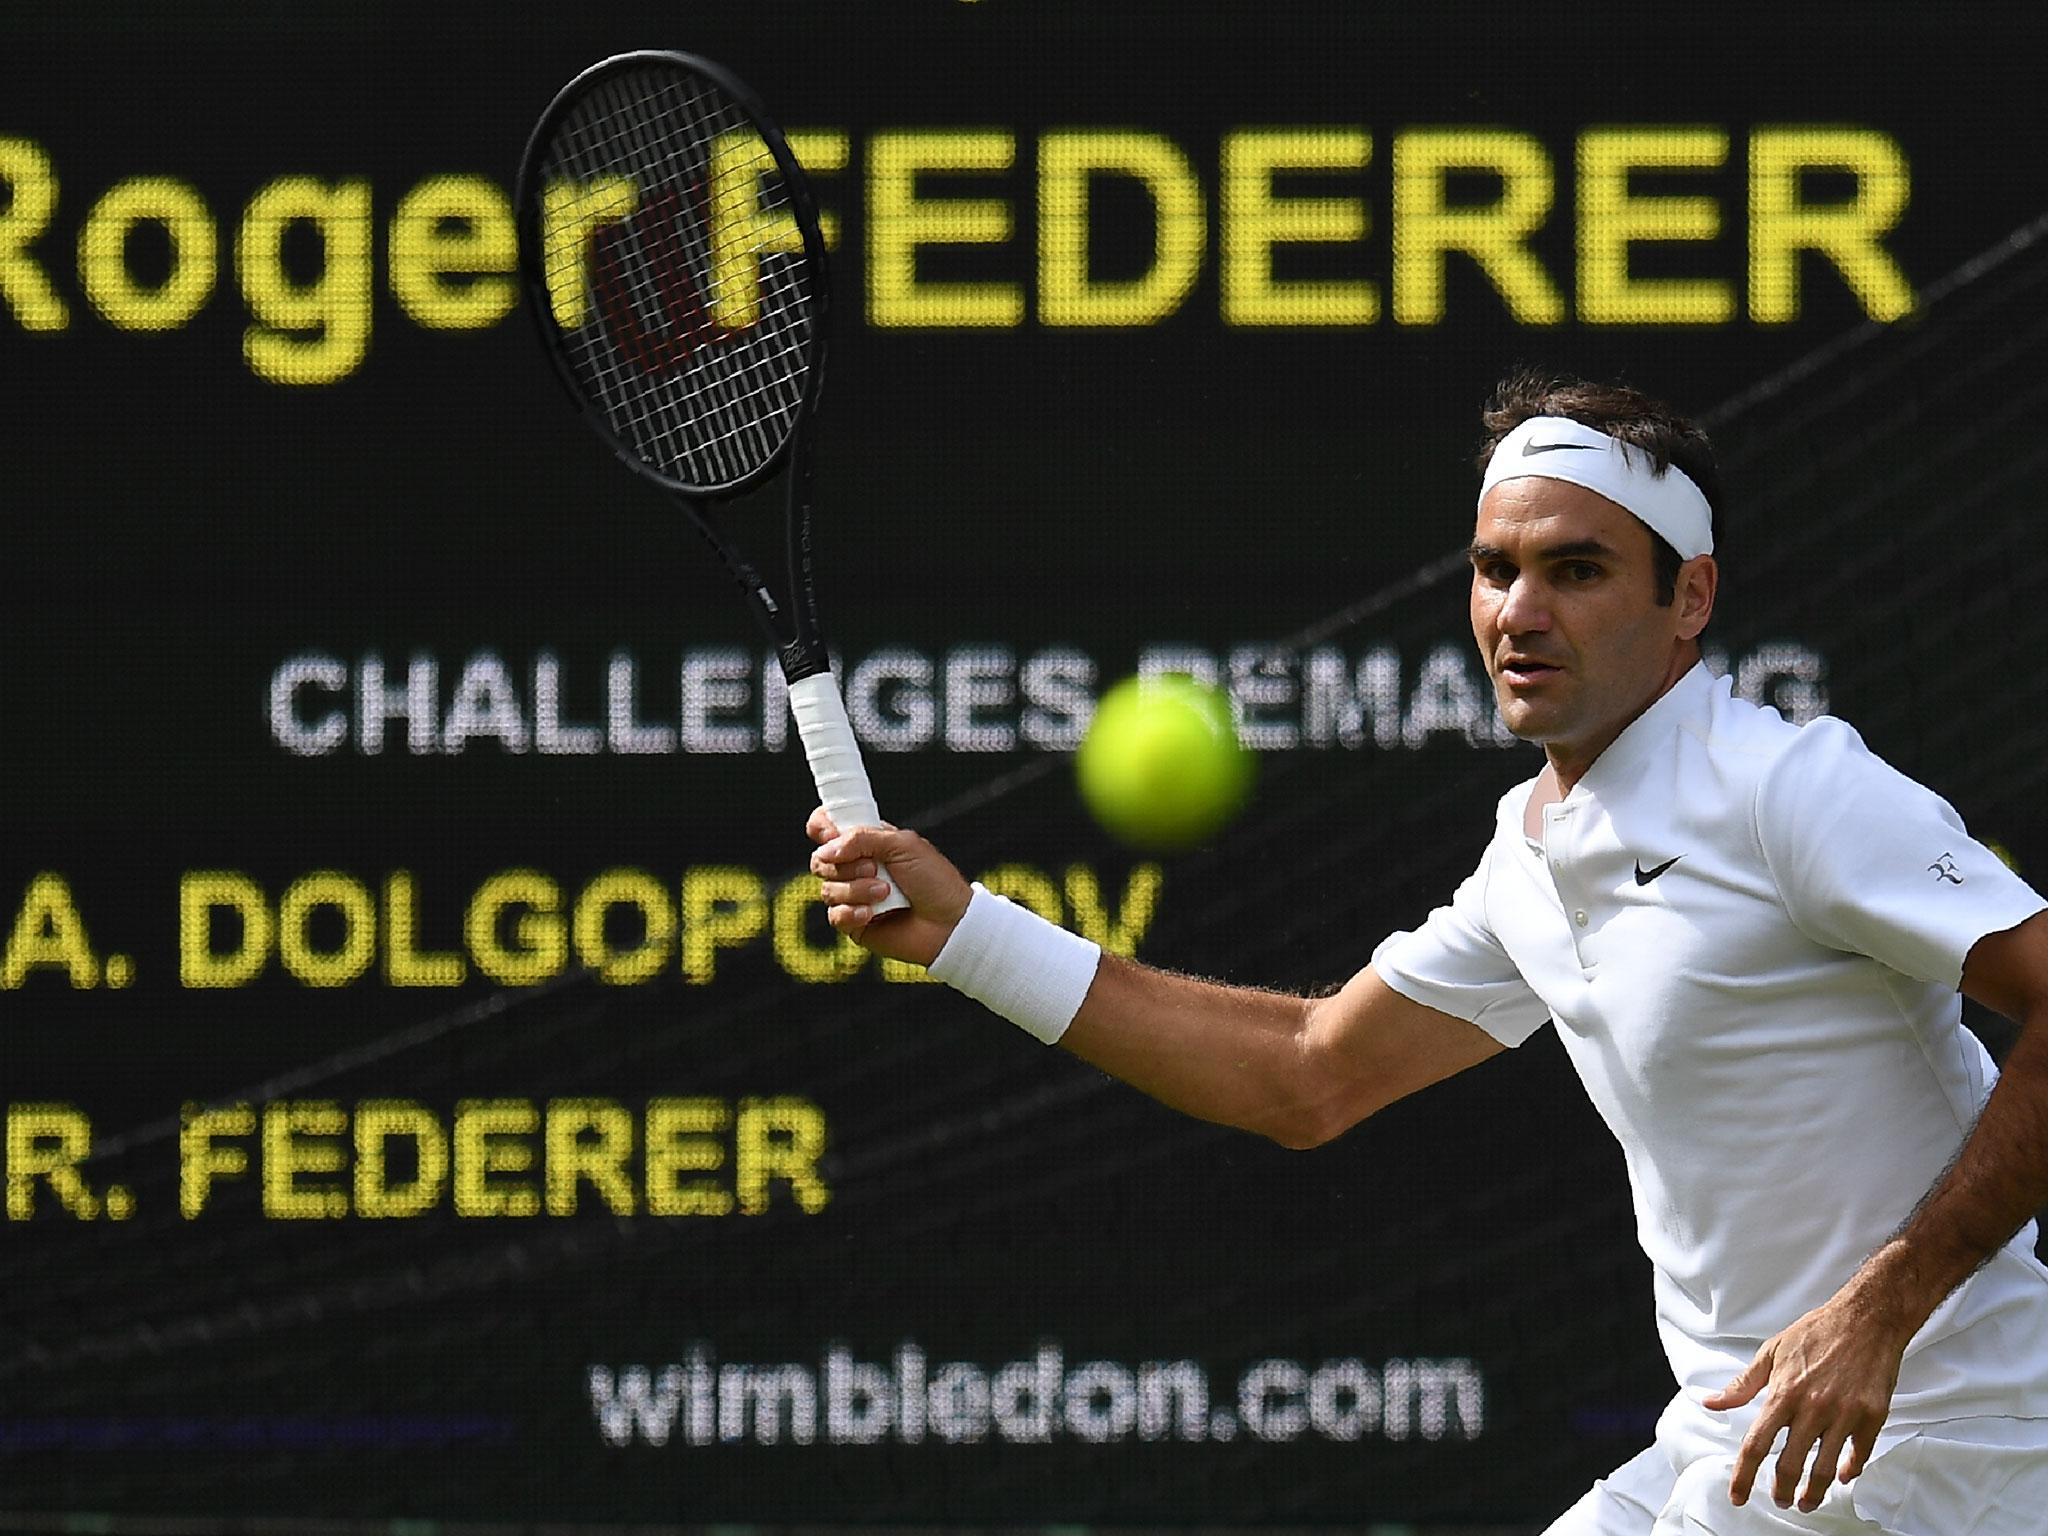 Federer was frustrated by the lack of playing time